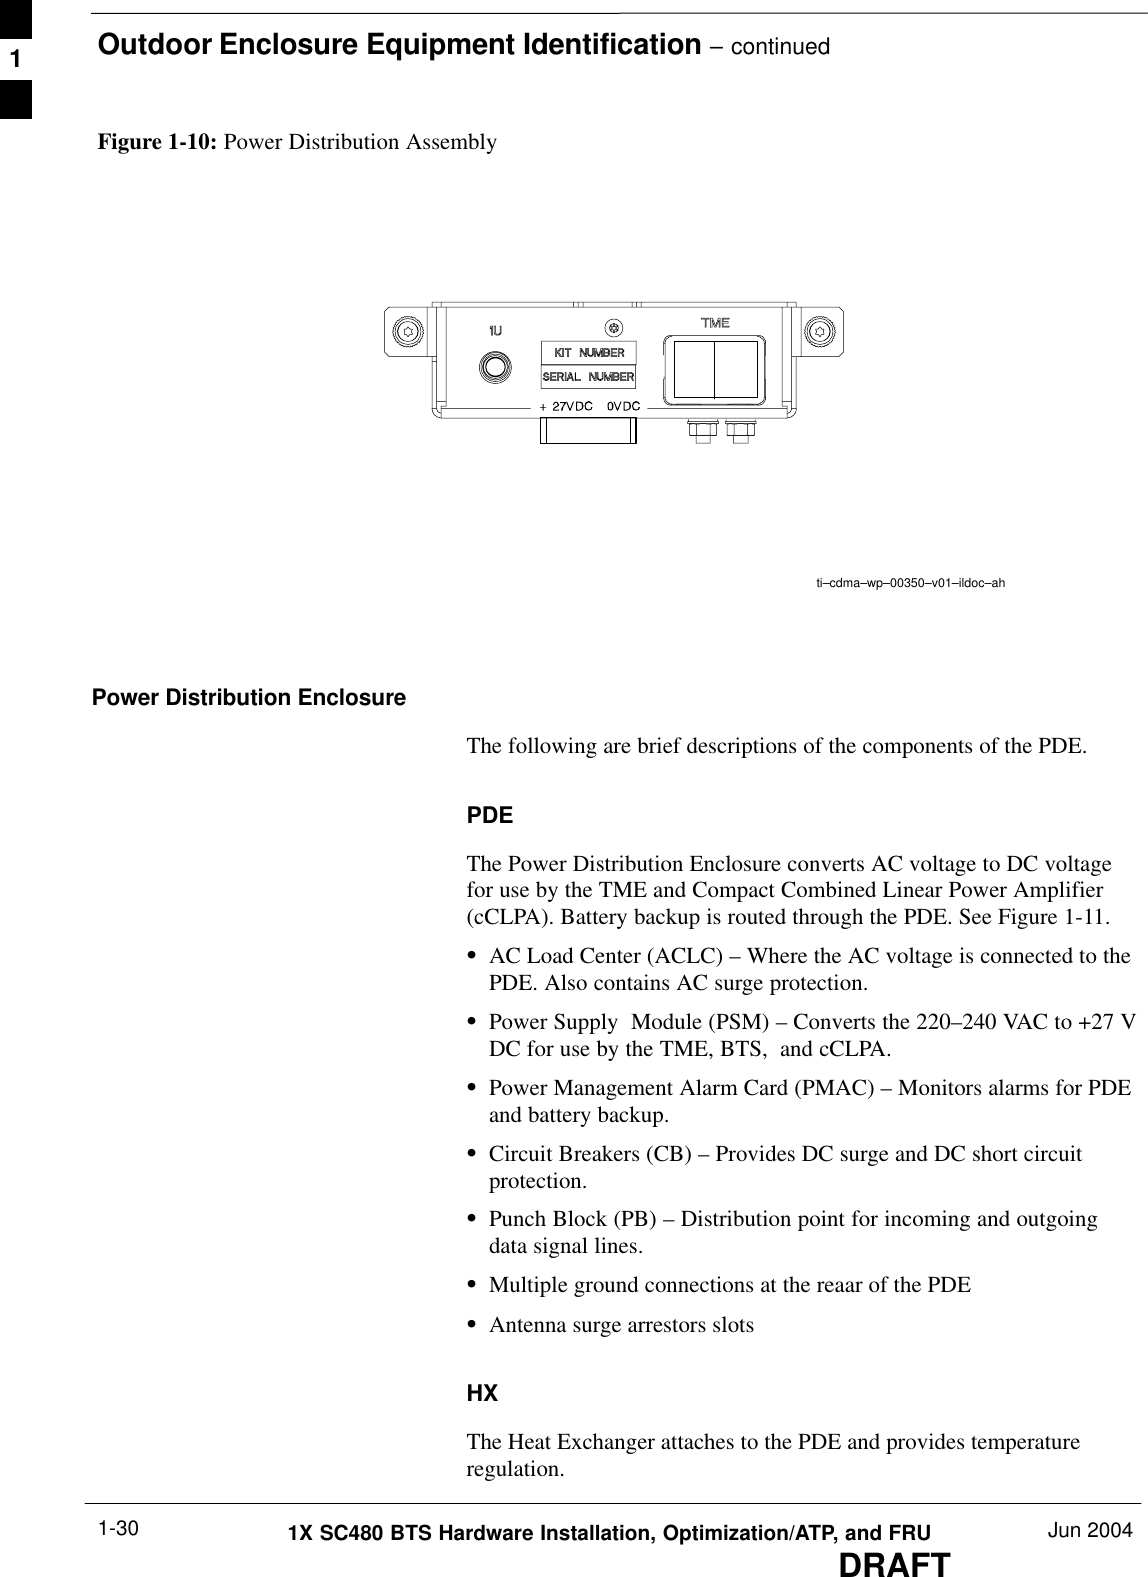 Outdoor Enclosure Equipment Identification – continuedDRAFT1X SC480 BTS Hardware Installation, Optimization/ATP, and FRU Jun 20041-30Figure 1-10: Power Distribution Assemblyti–cdma–wp–00350–v01–ildoc–ahPower Distribution EnclosureThe following are brief descriptions of the components of the PDE.PDEThe Power Distribution Enclosure converts AC voltage to DC voltagefor use by the TME and Compact Combined Linear Power Amplifier(cCLPA). Battery backup is routed through the PDE. See Figure 1-11.SAC Load Center (ACLC) – Where the AC voltage is connected to thePDE. Also contains AC surge protection.SPower Supply  Module (PSM) – Converts the 220–240 VAC to +27 VDC for use by the TME, BTS,  and cCLPA.SPower Management Alarm Card (PMAC) – Monitors alarms for PDEand battery backup.SCircuit Breakers (CB) – Provides DC surge and DC short circuitprotection.SPunch Block (PB) – Distribution point for incoming and outgoingdata signal lines.SMultiple ground connections at the reaar of the PDESAntenna surge arrestors slotsHXThe Heat Exchanger attaches to the PDE and provides temperatureregulation.1